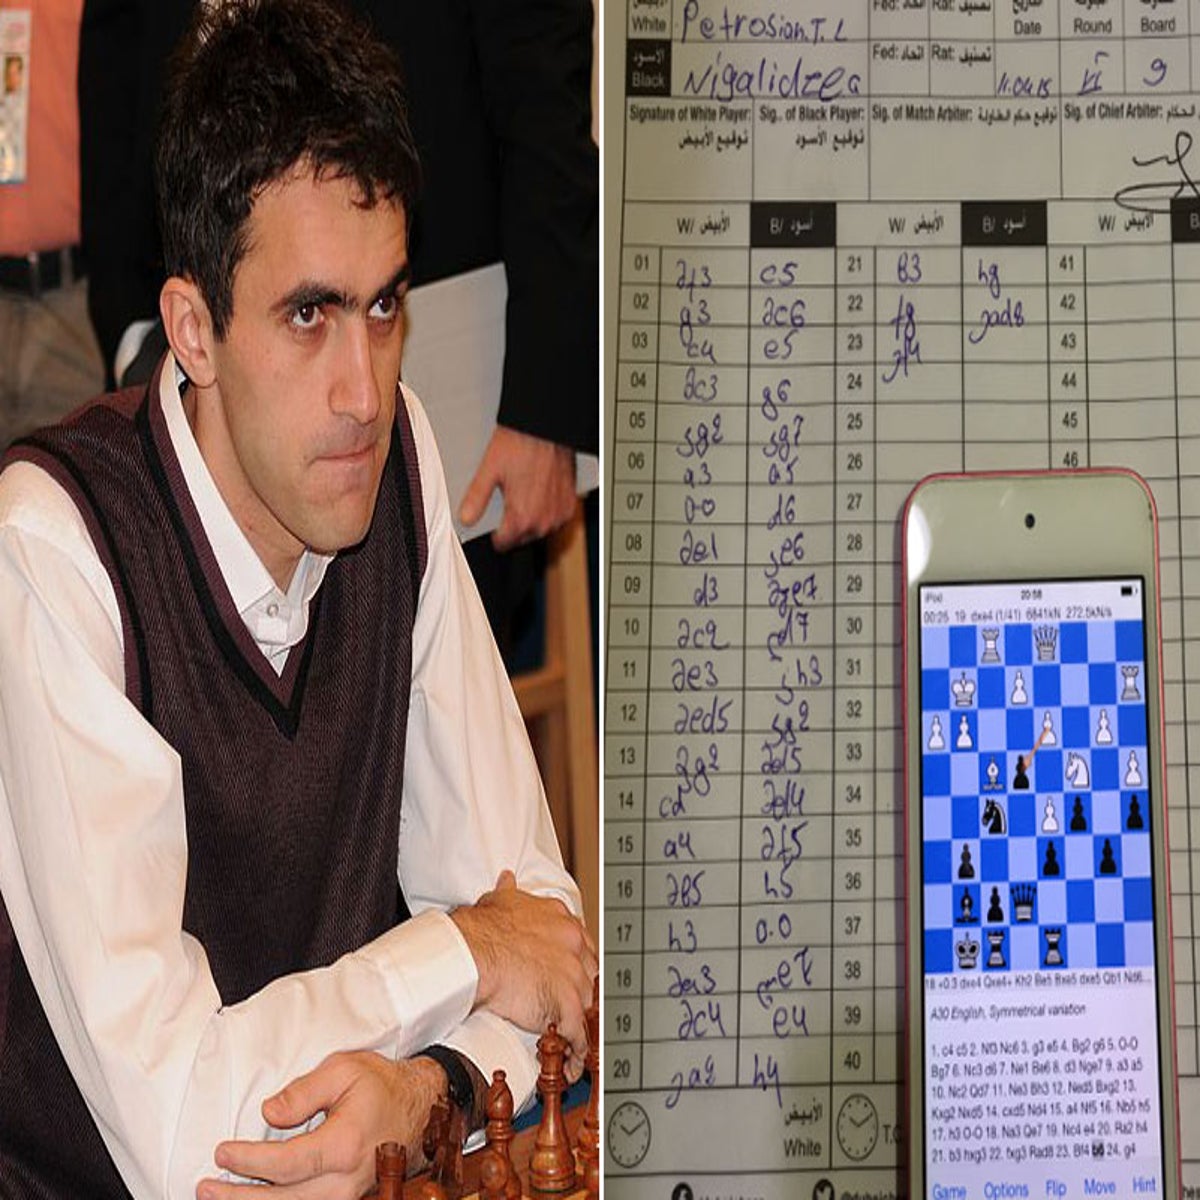 Chess players 'using phone apps to cheat